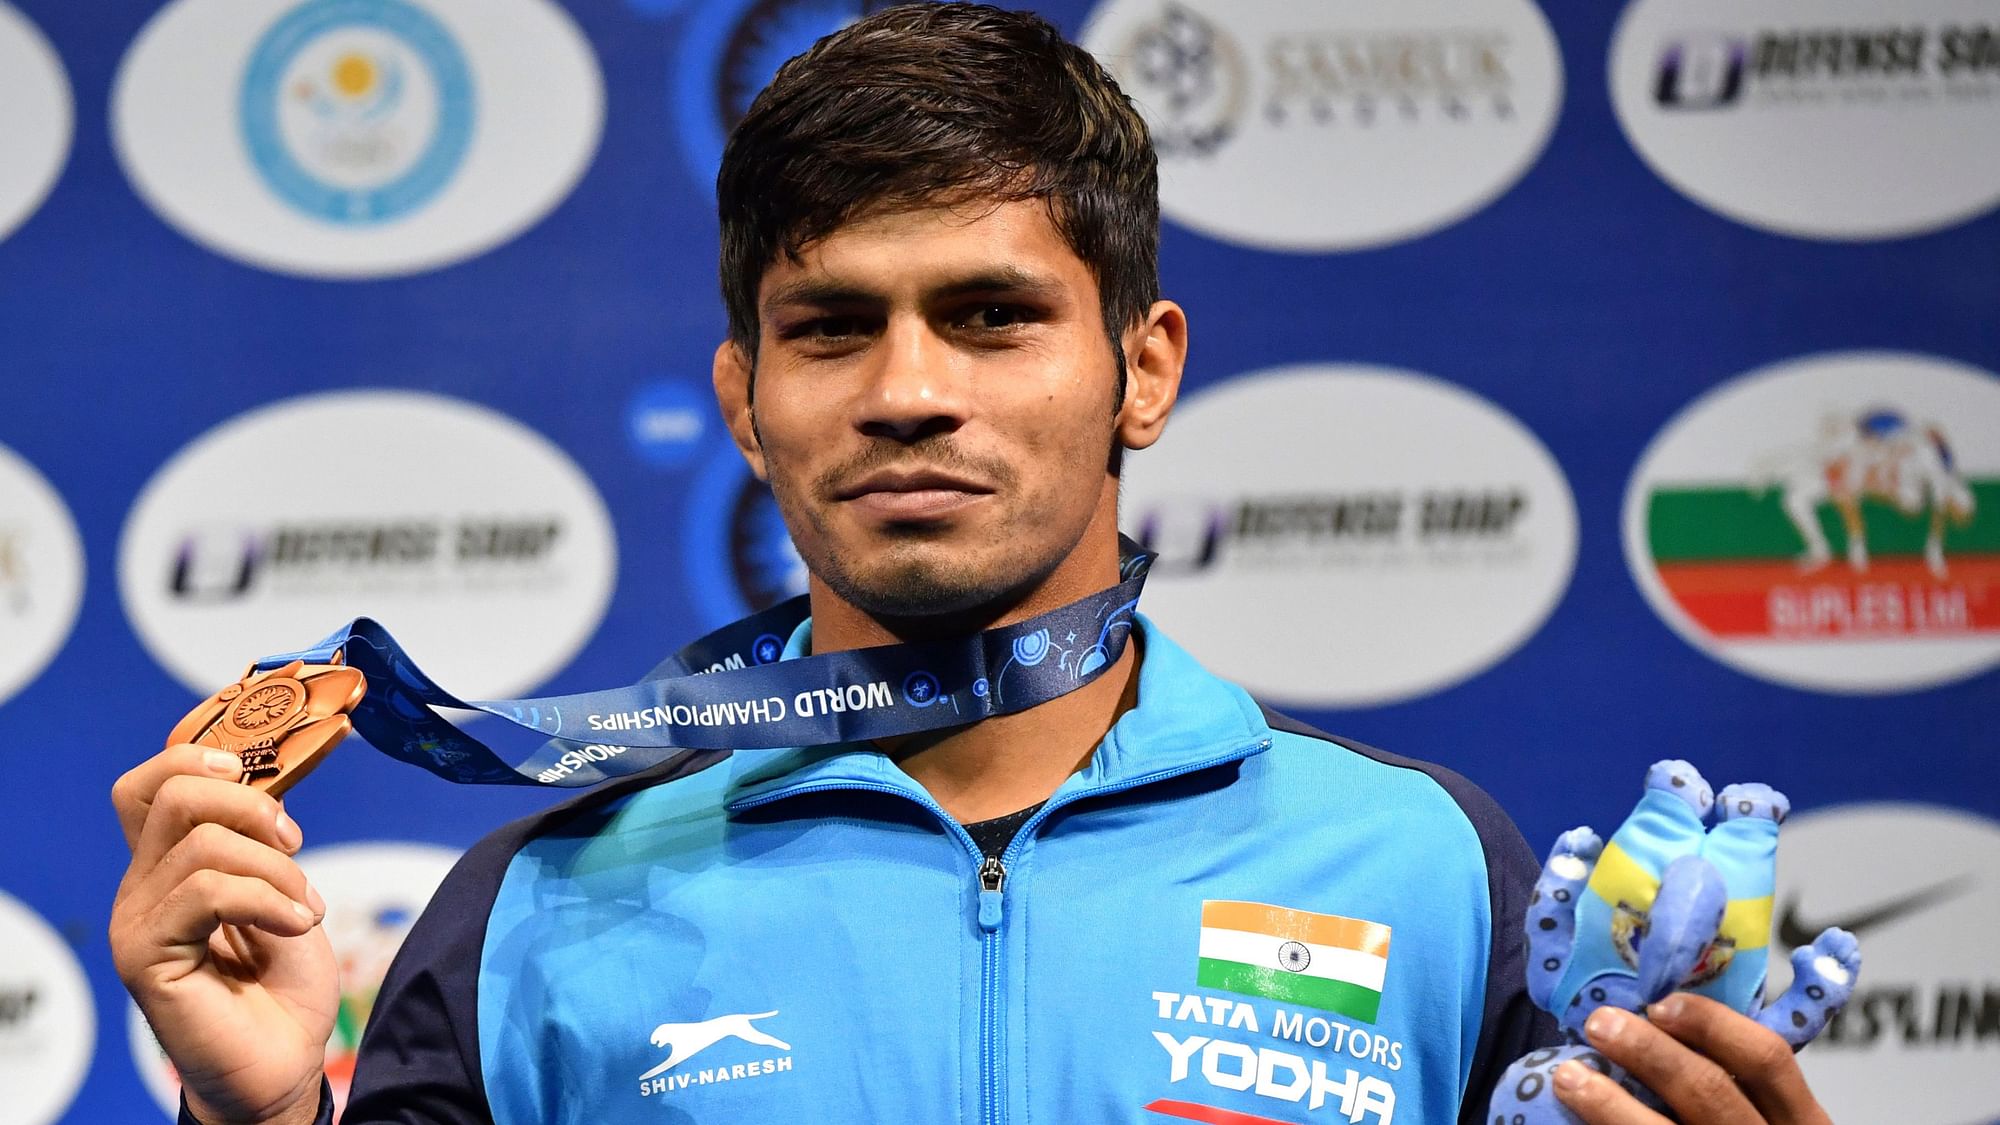 Rahul Aware has won a bronze medal for India in the 61 kg category at the Wrestling World Championships.